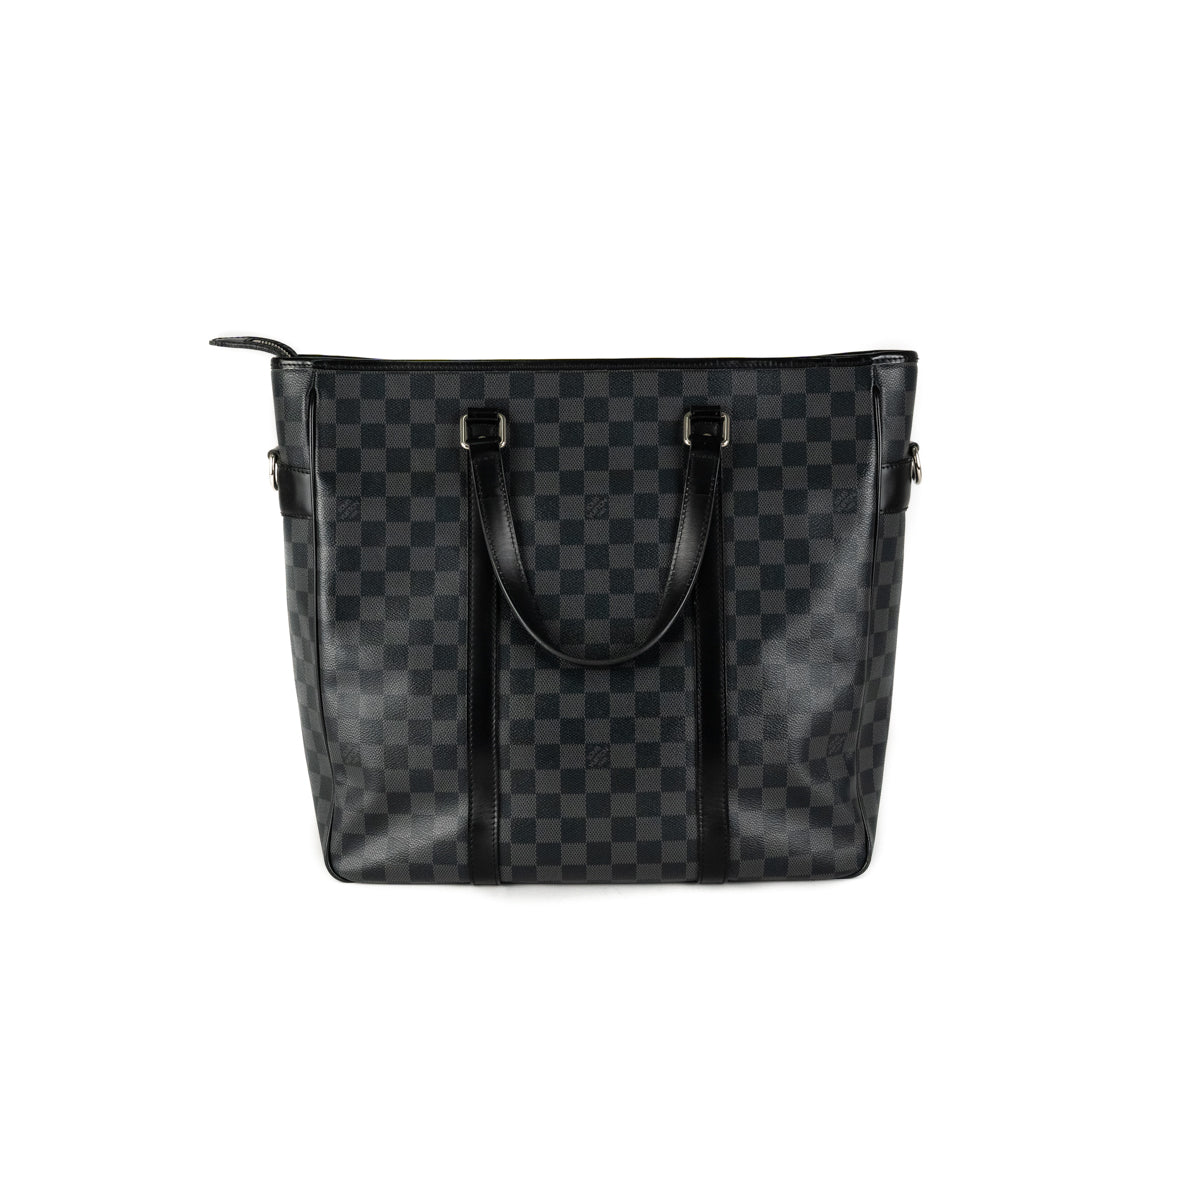 Available In-Store/Grab/Lbc Louis Vuitton Tote Tadao Damier